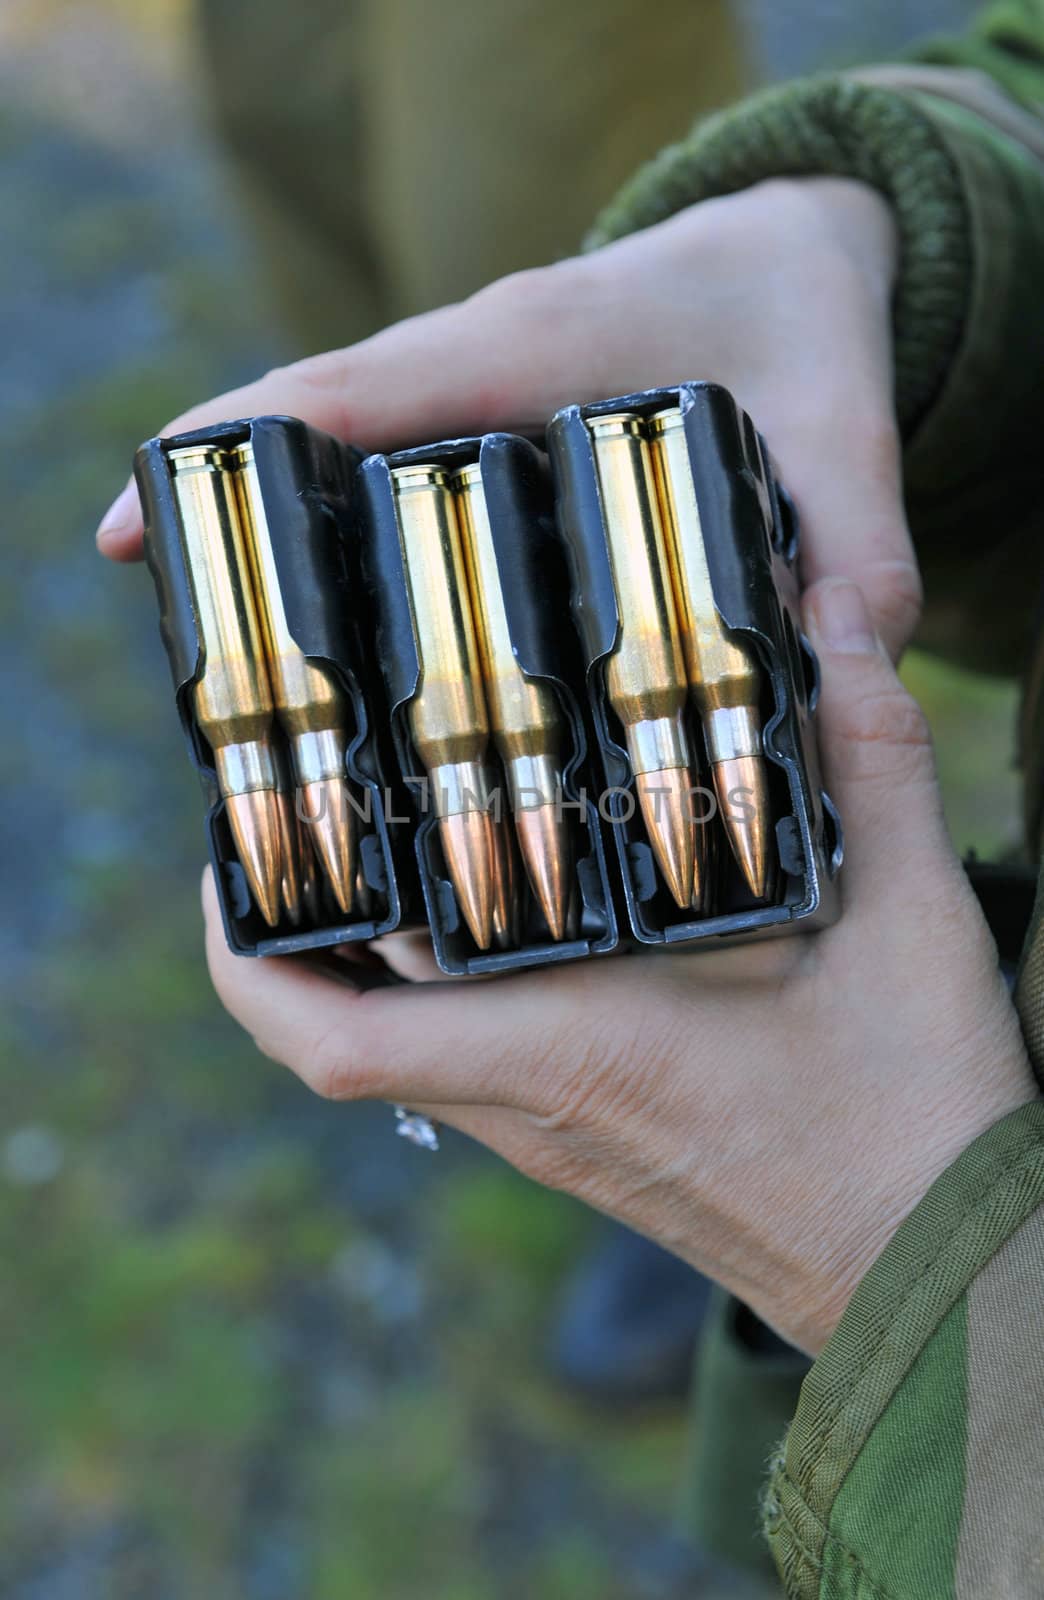 Soldier holding three clips of 7,62x51 nato ammunition